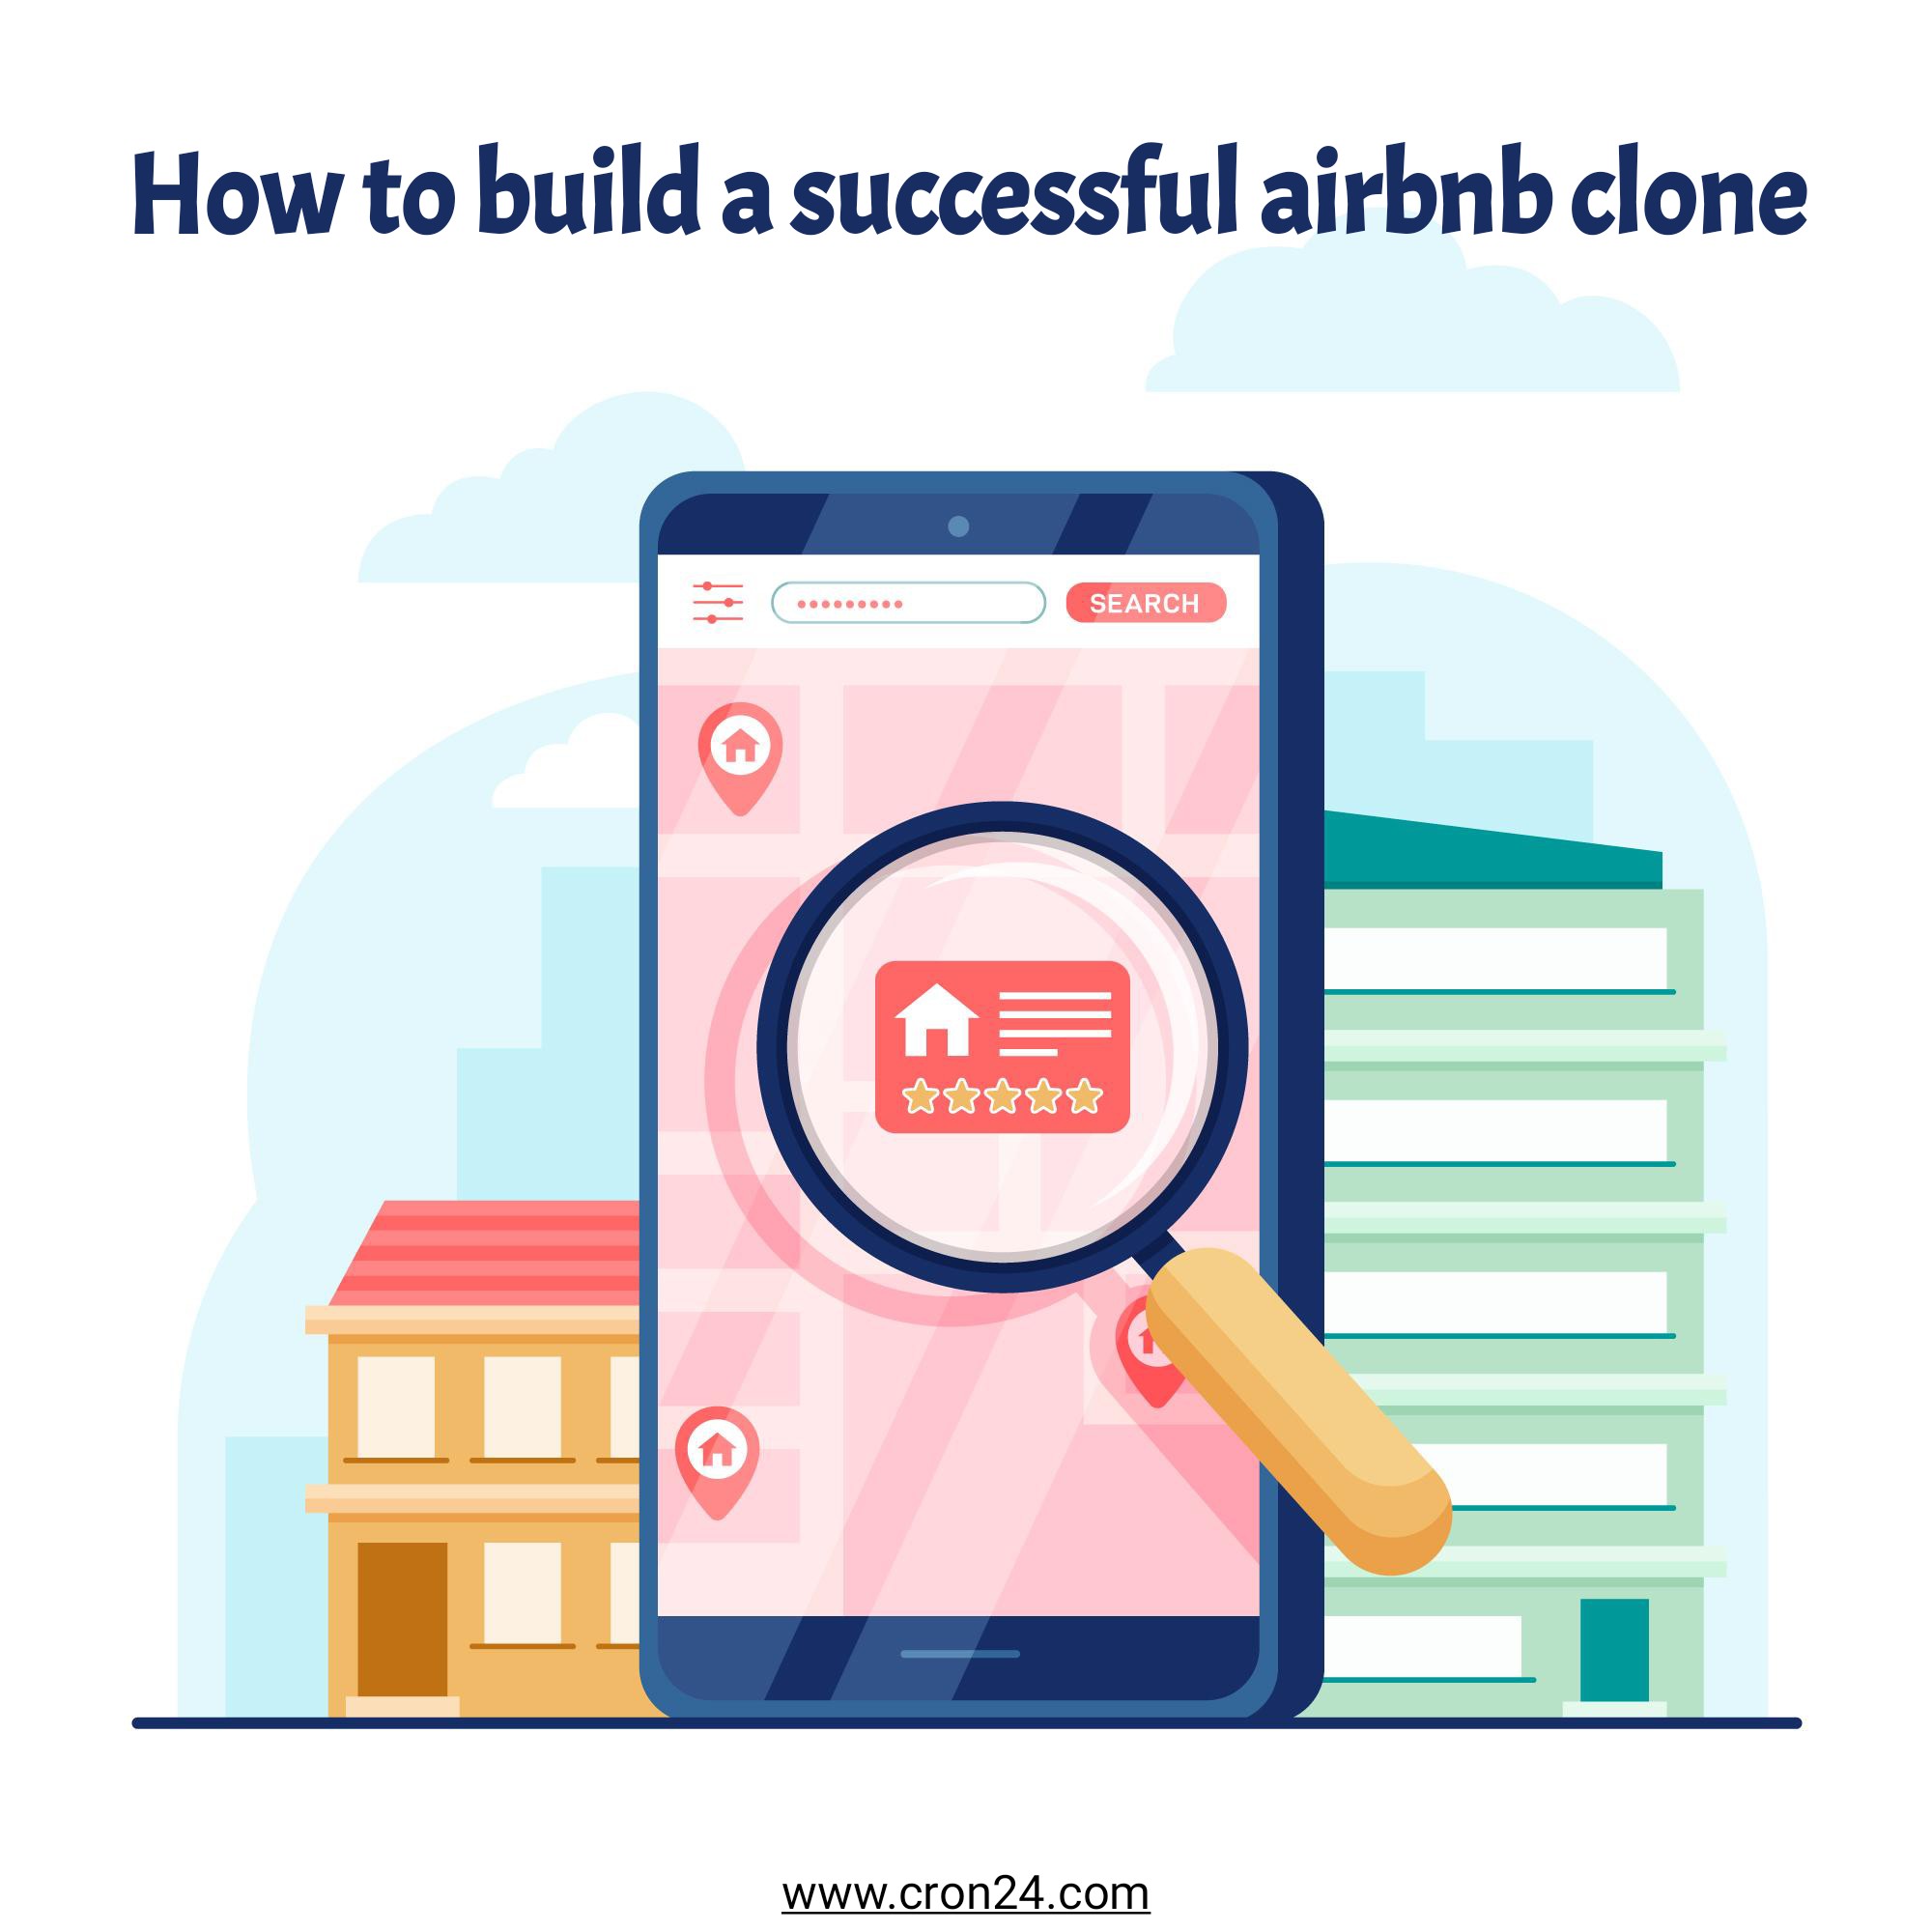 How To Build a Successful Airbnb Clone - A Ultimate Guide